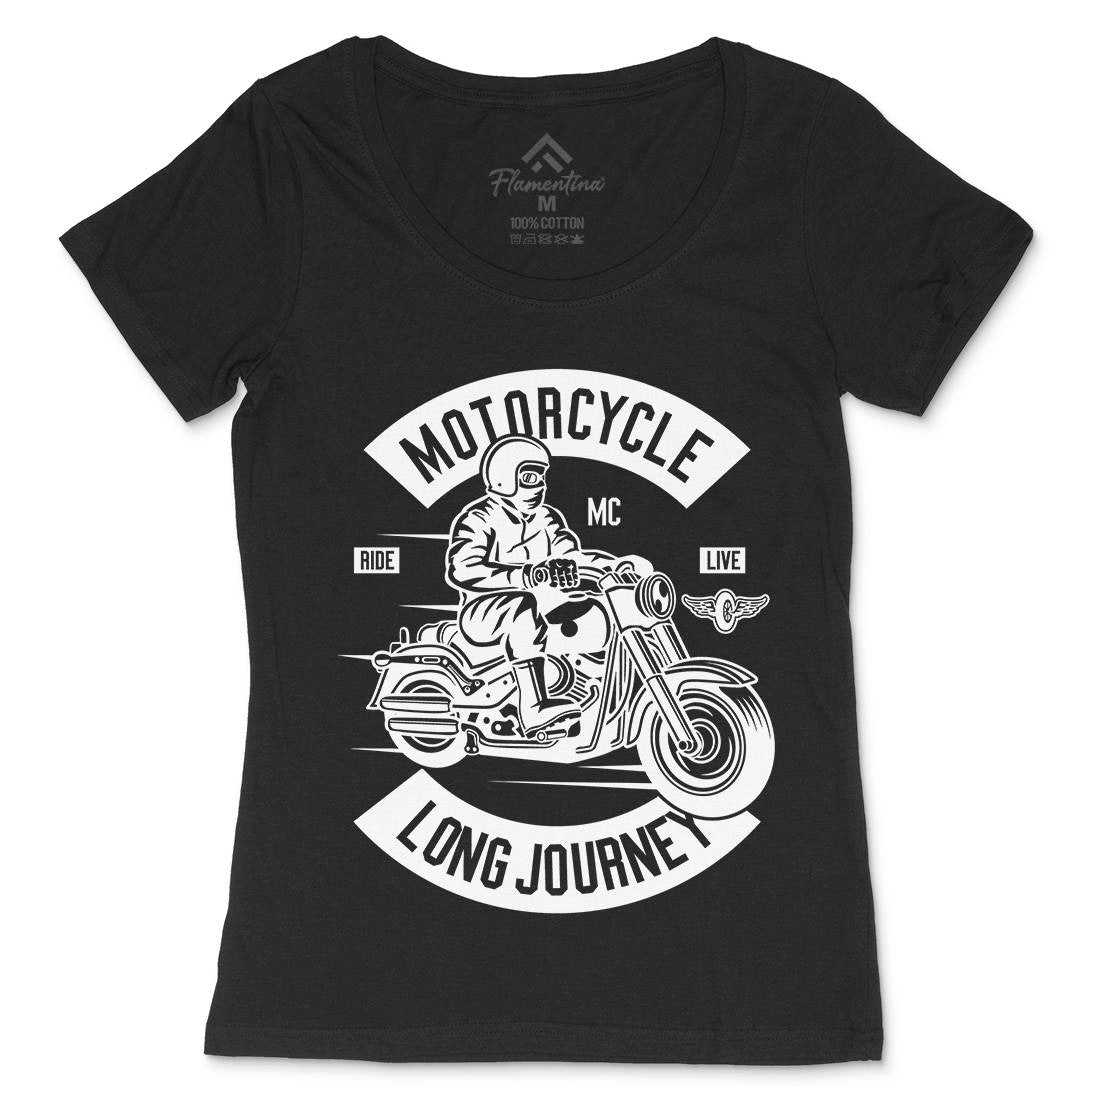 Long Journey Womens Scoop Neck T-Shirt Motorcycles B583